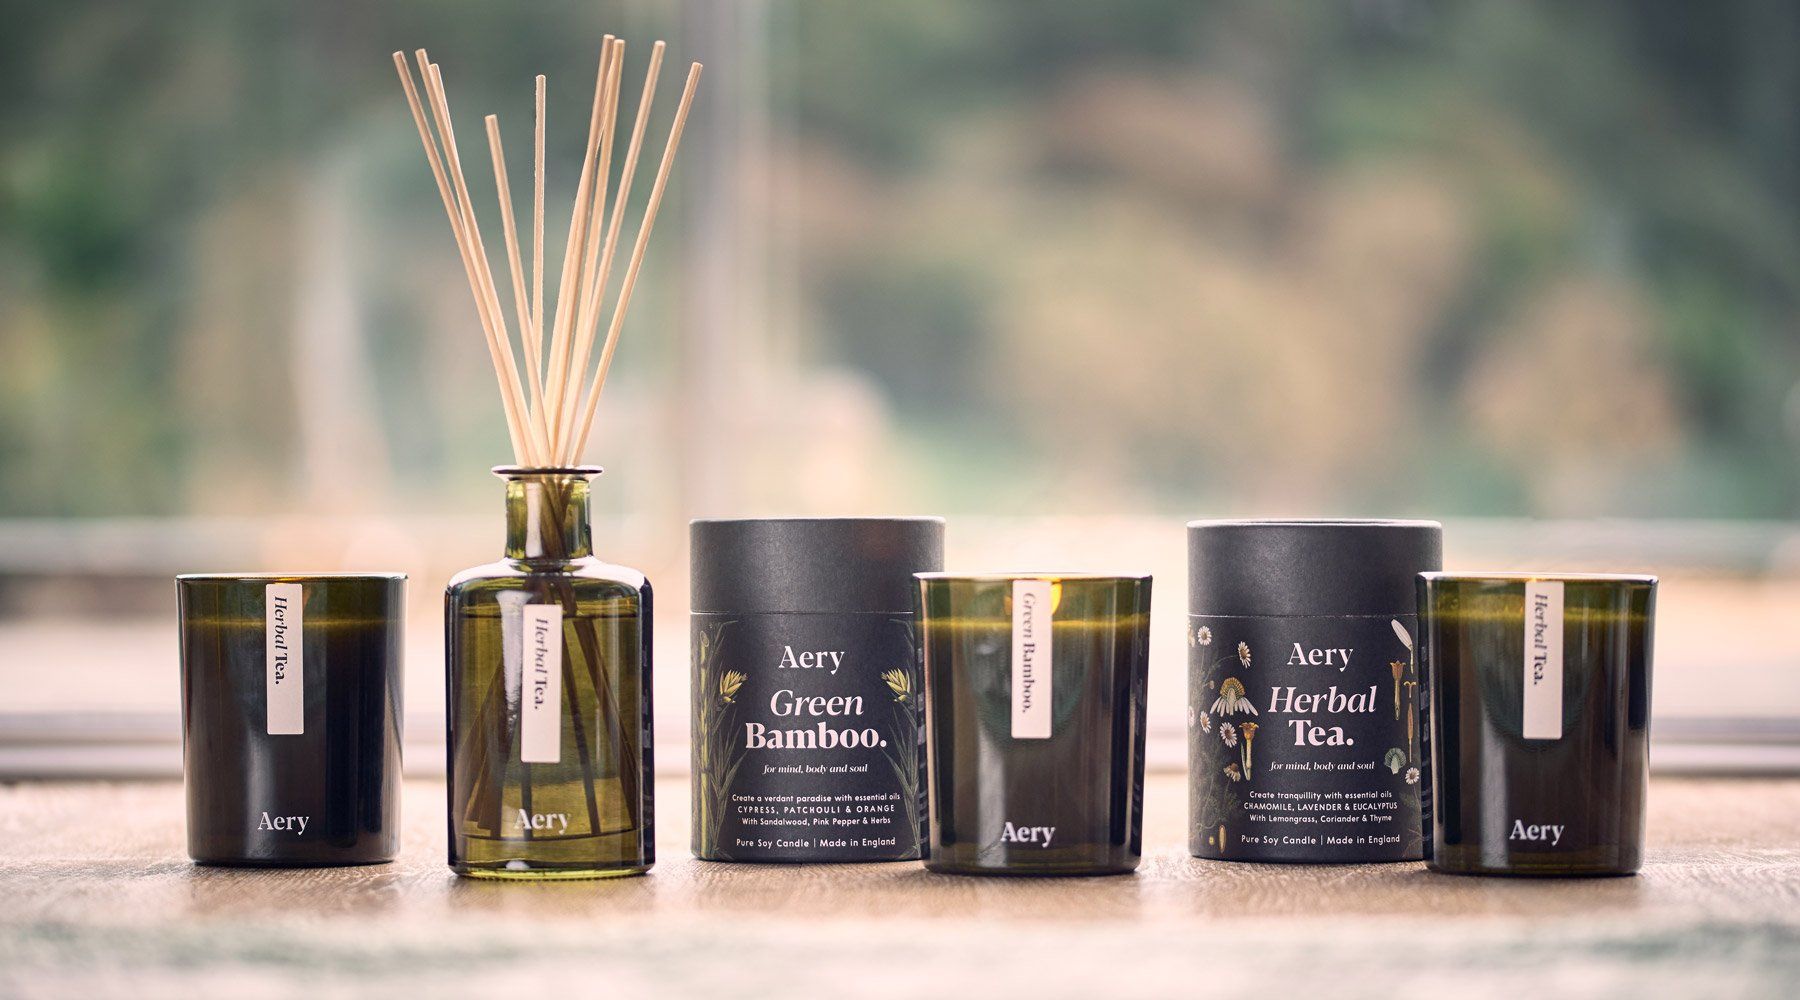 aery green botanical candles and packaging with matching green bottle reed diffuser